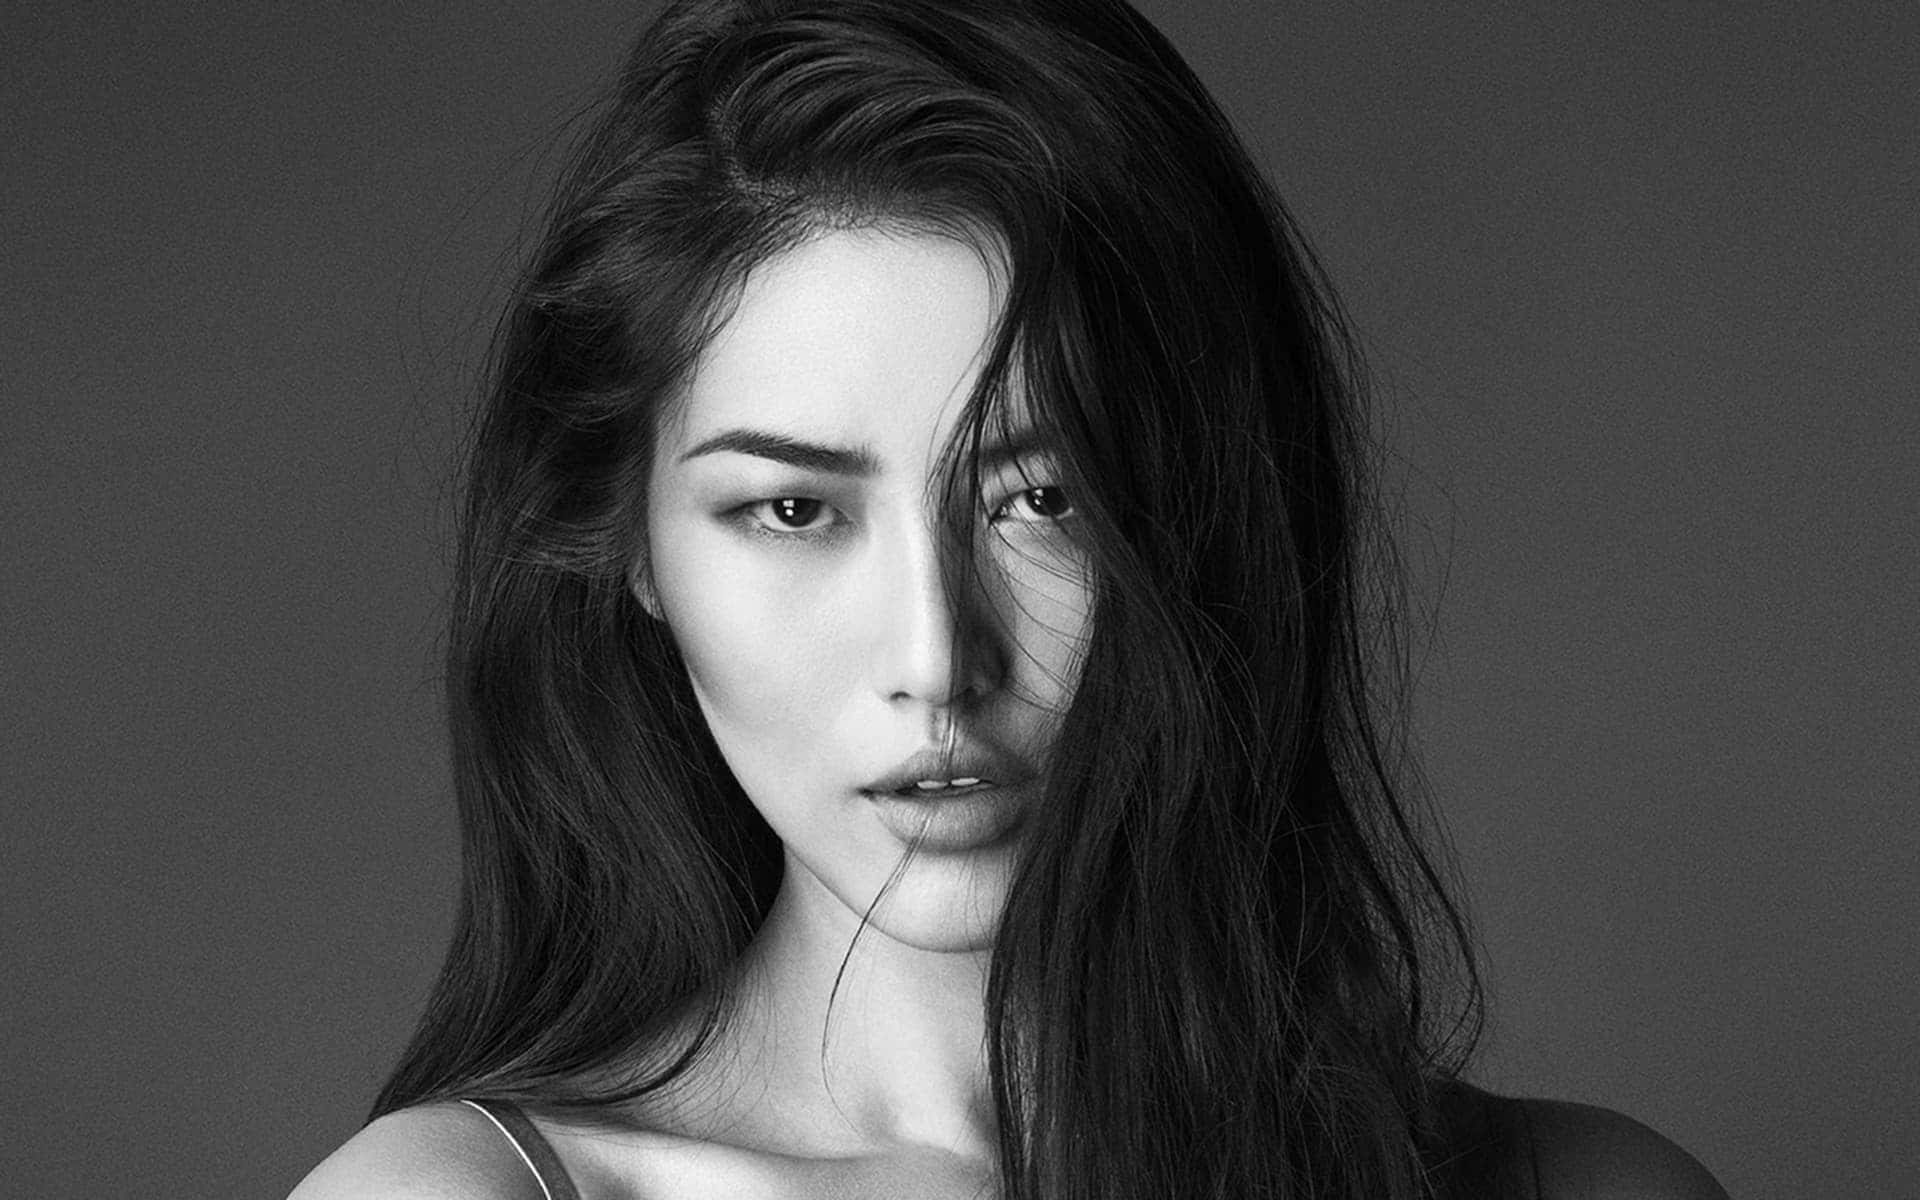 "liu Wen, One Of The World's Top Asian Models, Stunning In Monochrome." Wallpaper